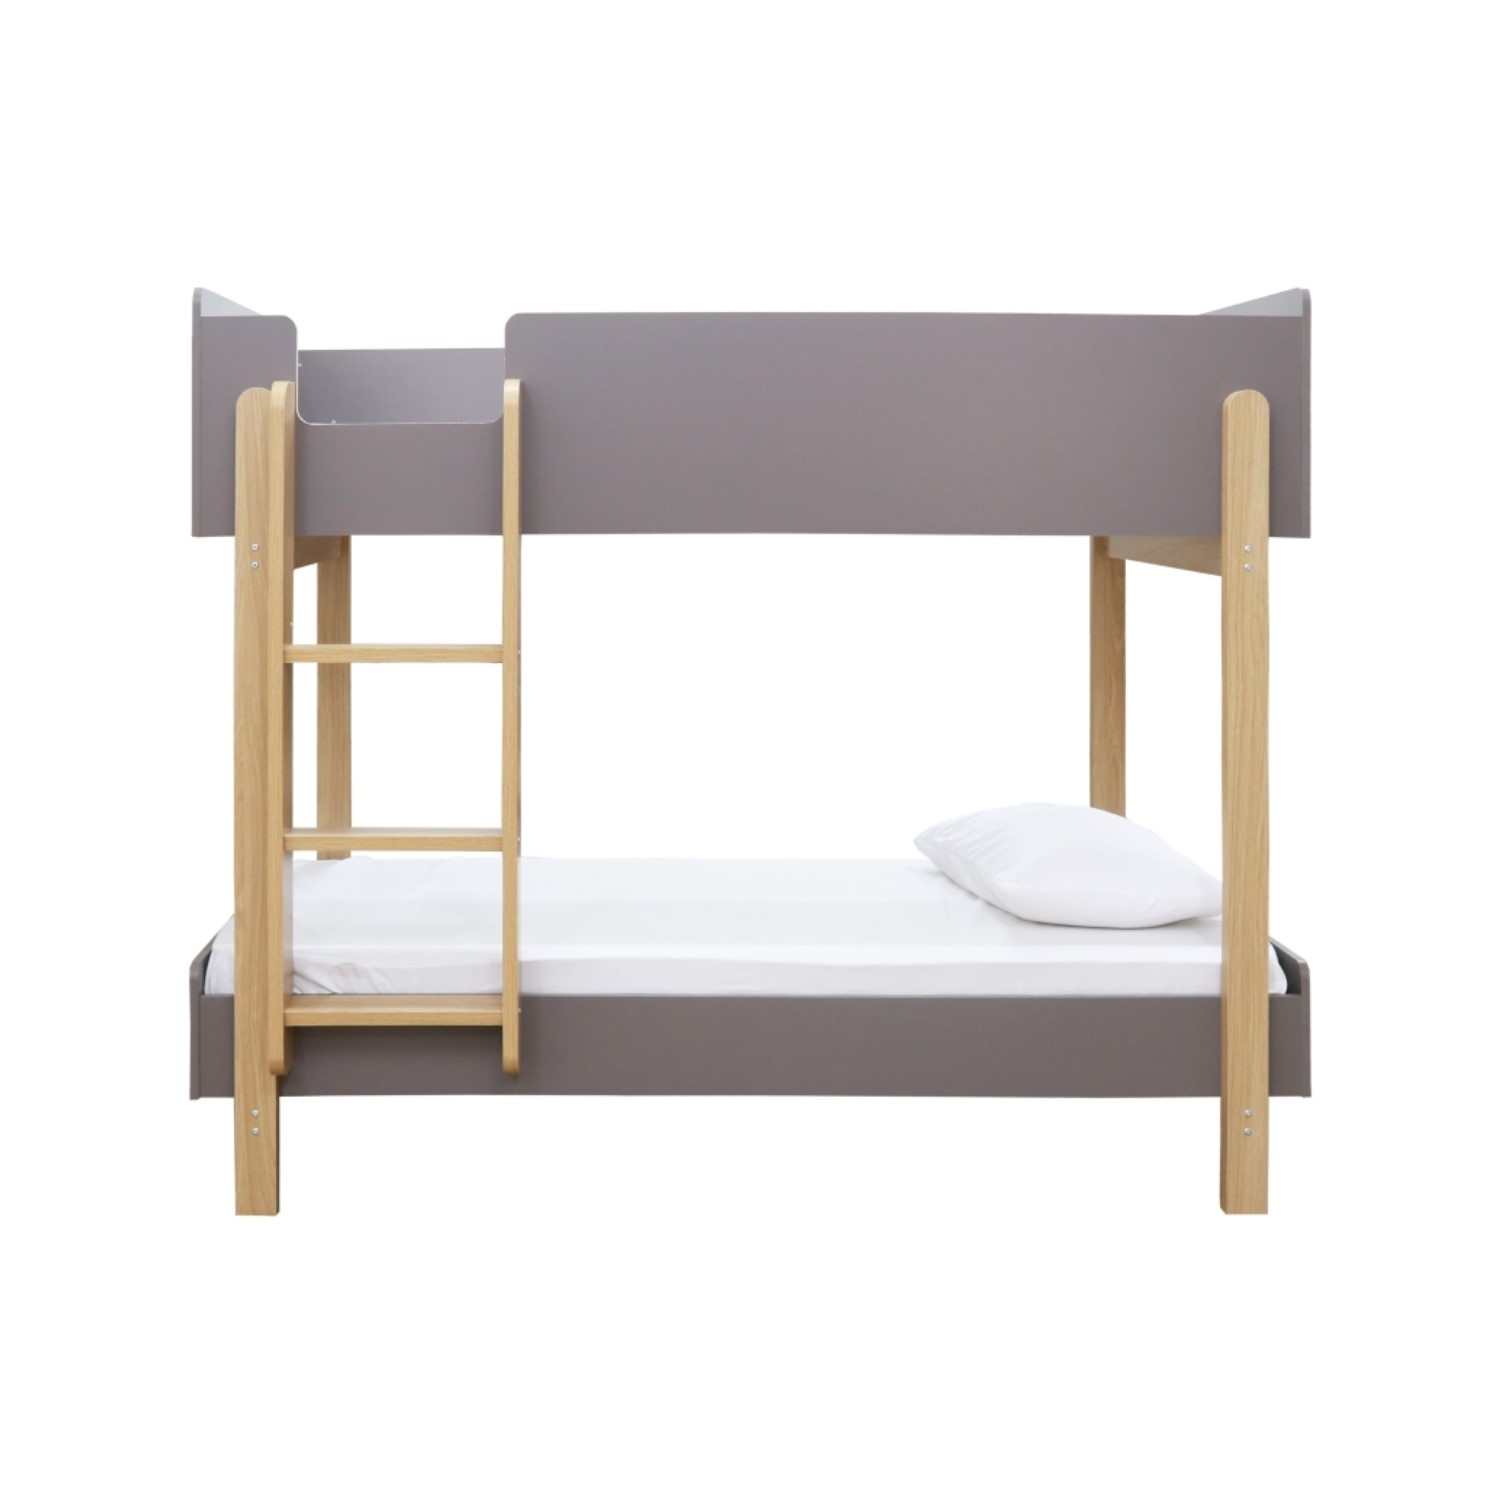 Read more about Grey and oak bunk bed hero lpd